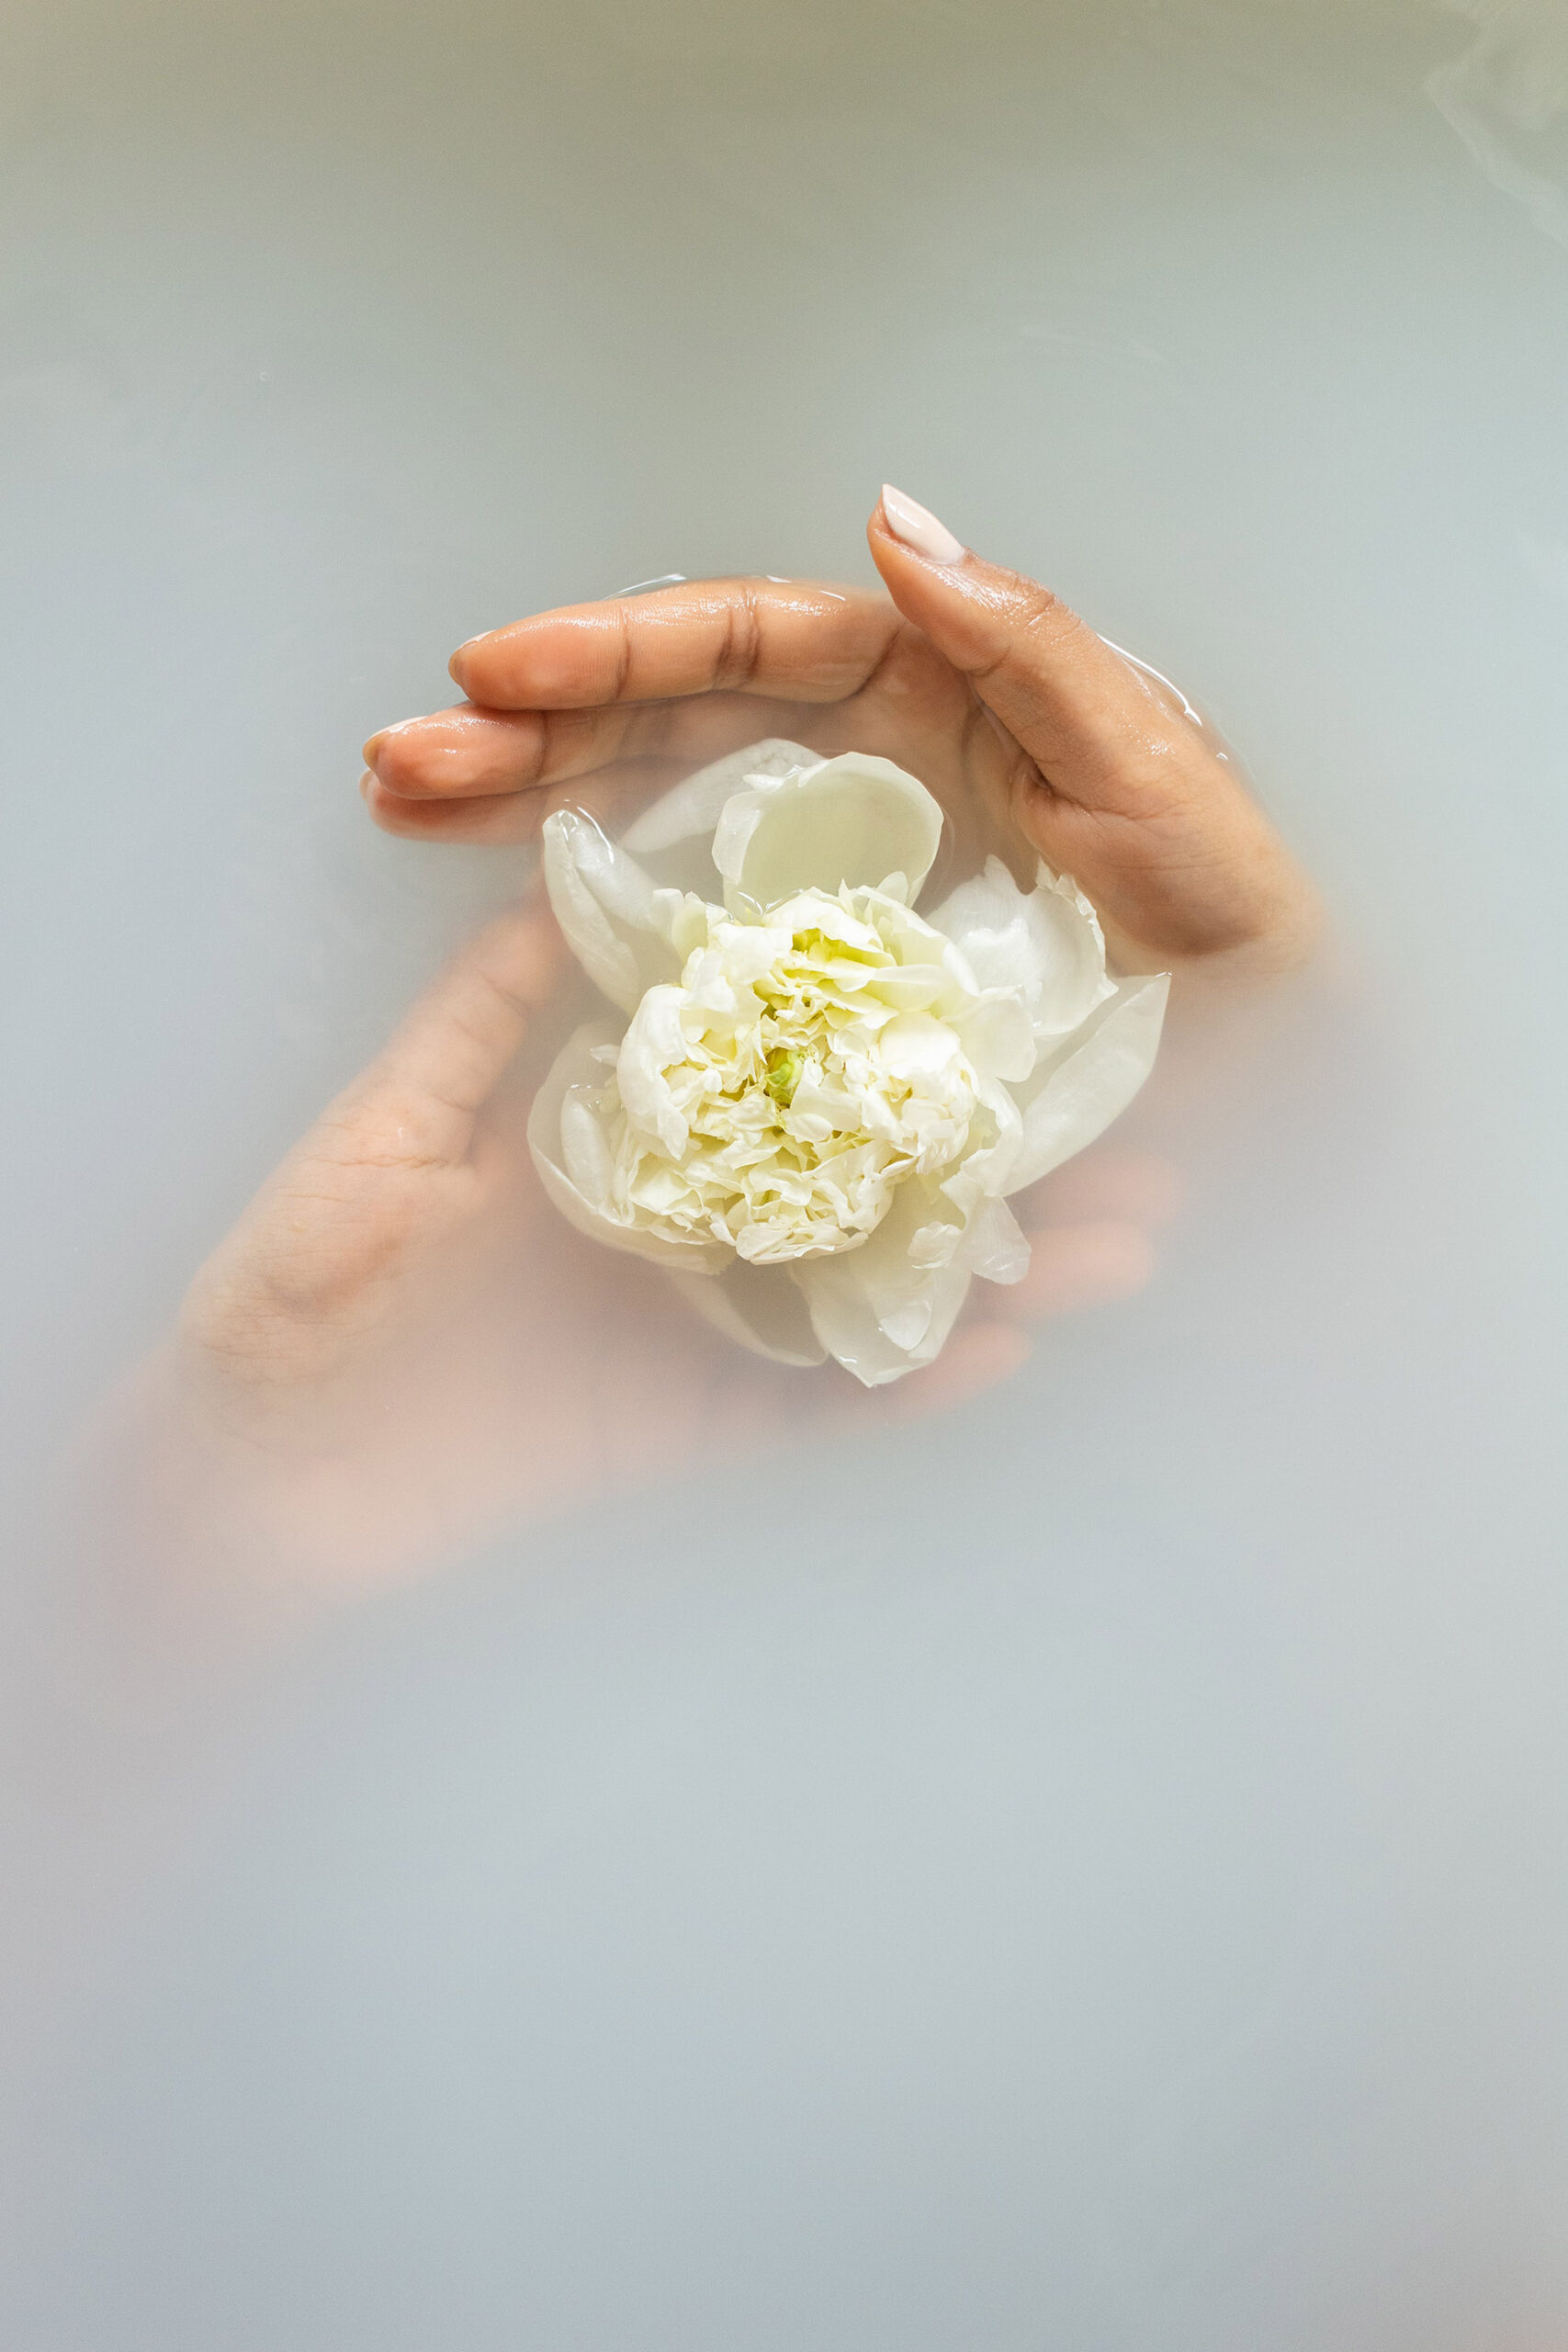 manicured hands and flower in water